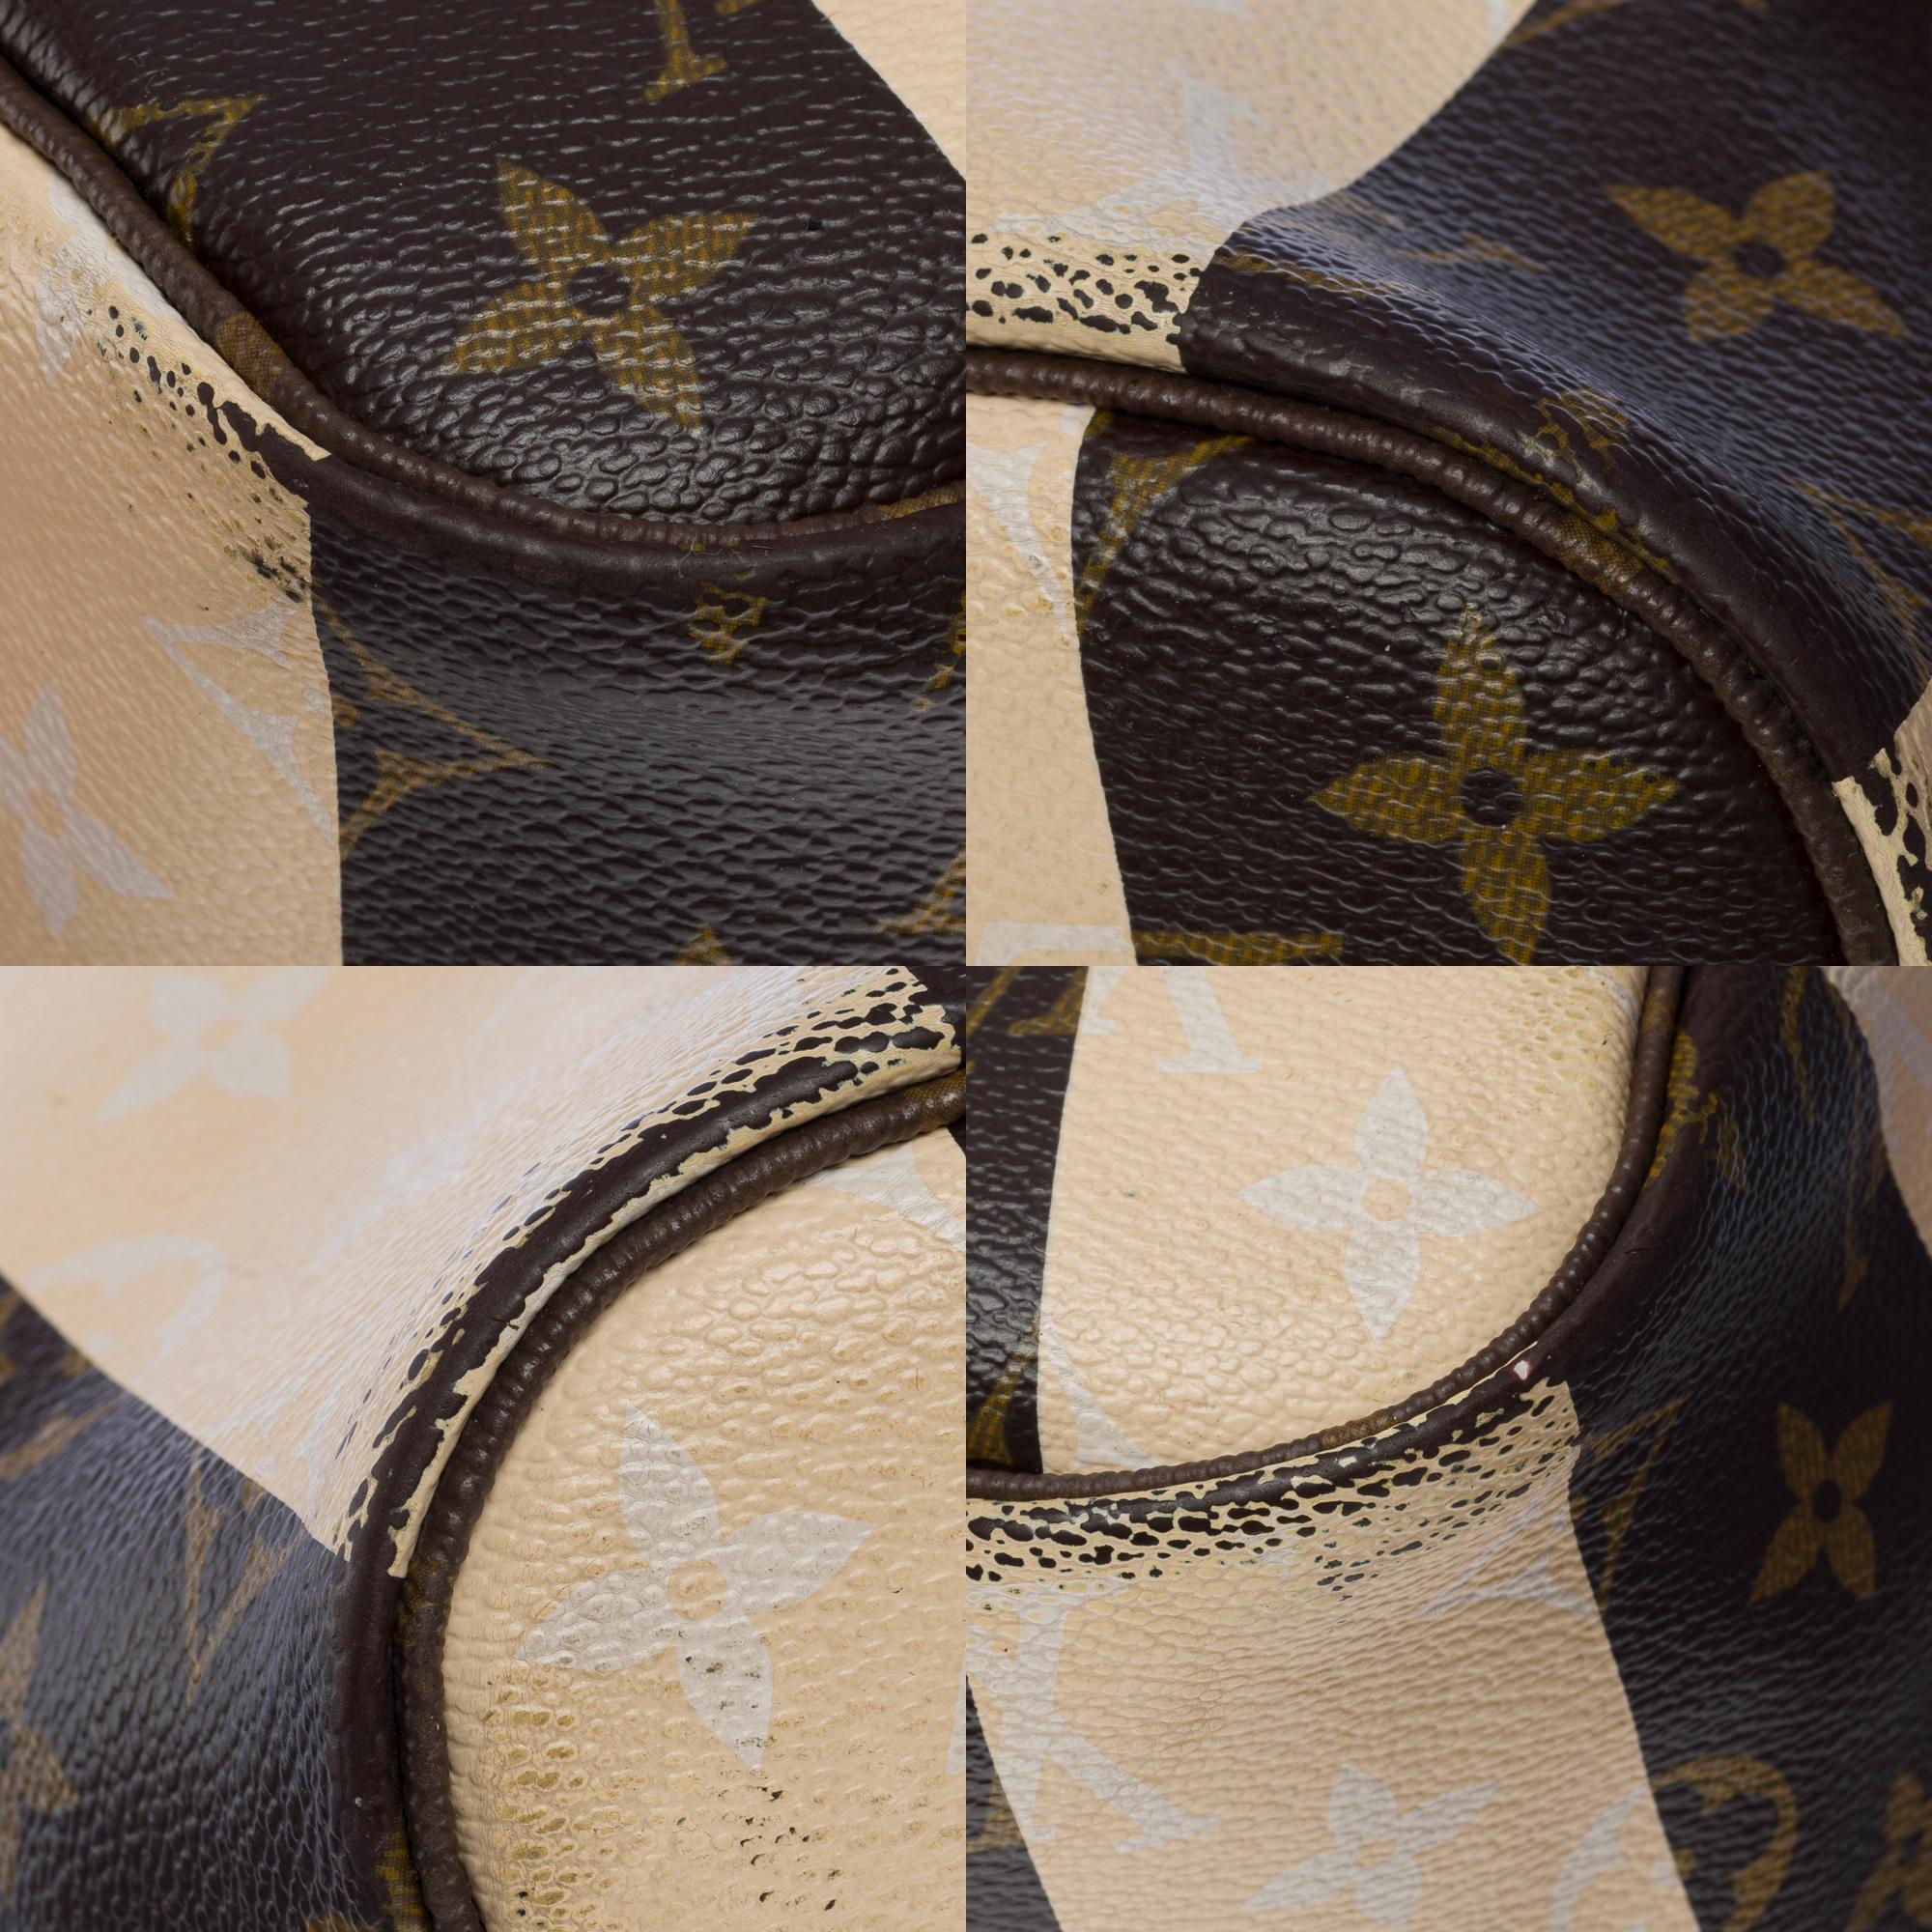 Louis Vuitton Neverfull Limited Edition Stripes Tote bag in brown canvas, GHW 3